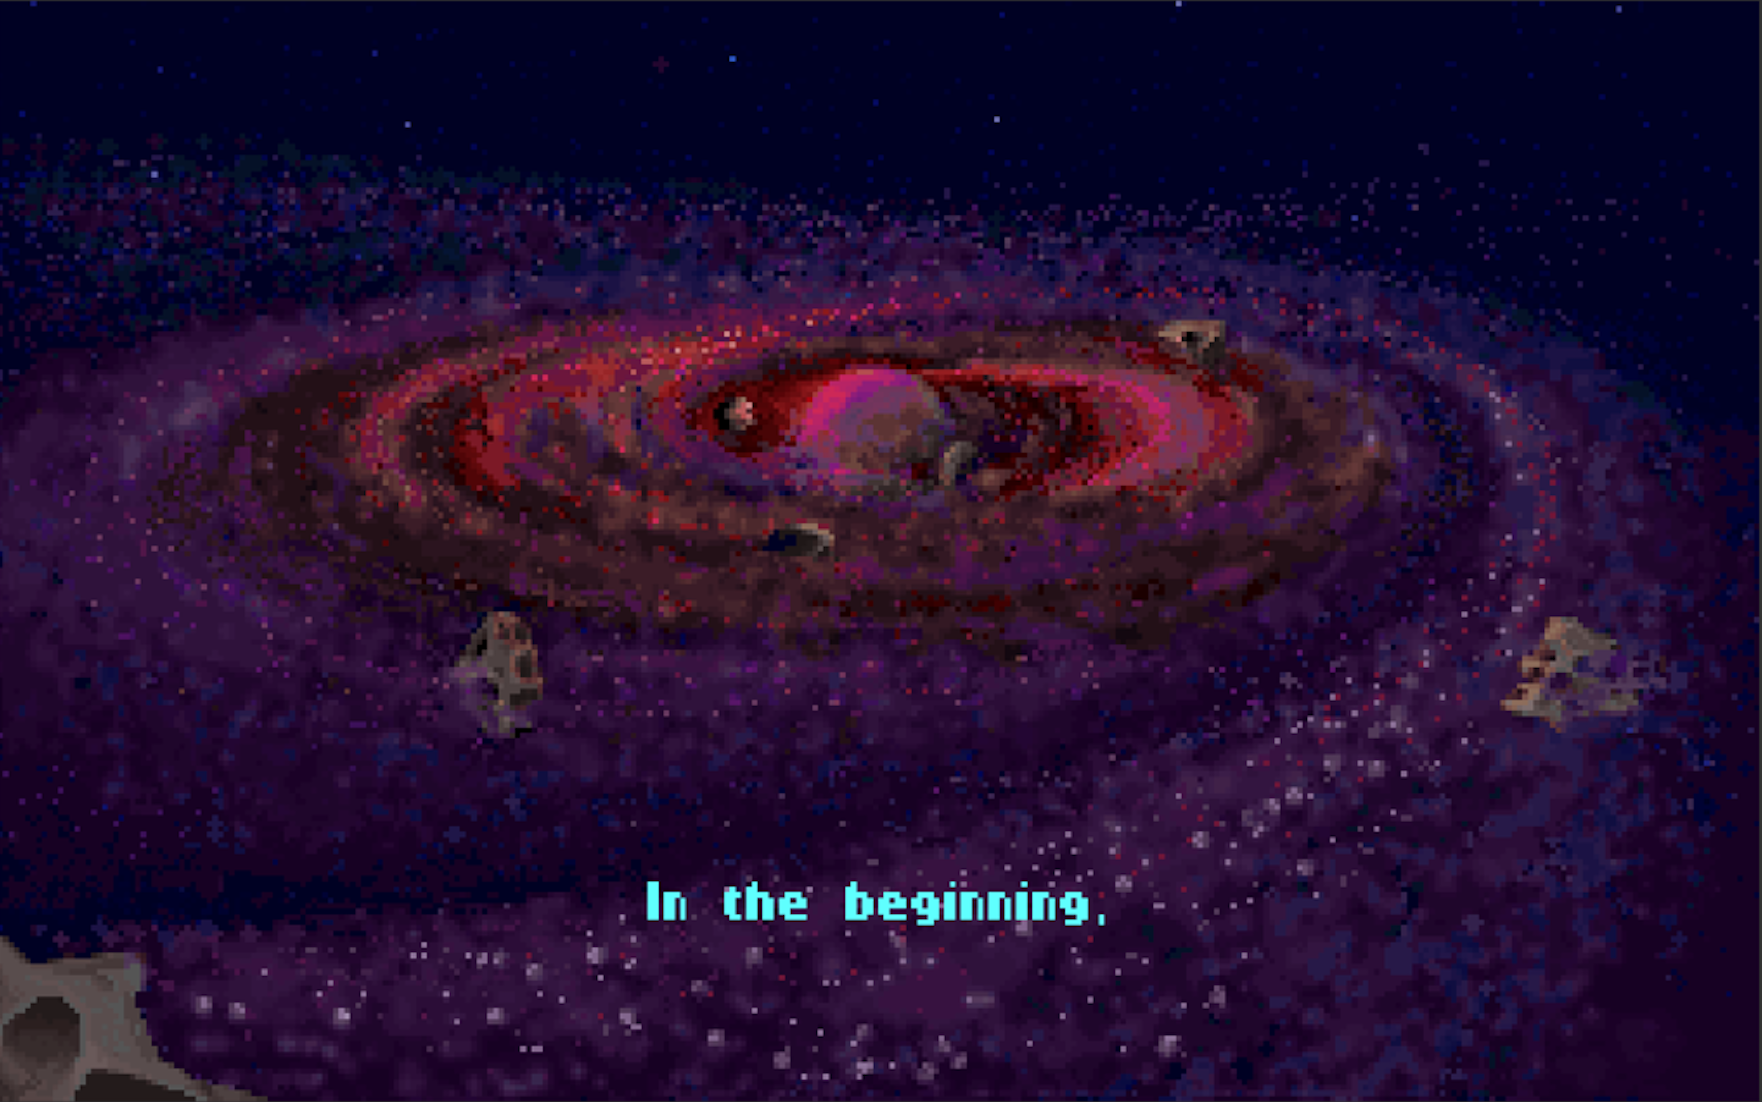 The splash screen from the computer game Civilization, of an ancient forming Earth.